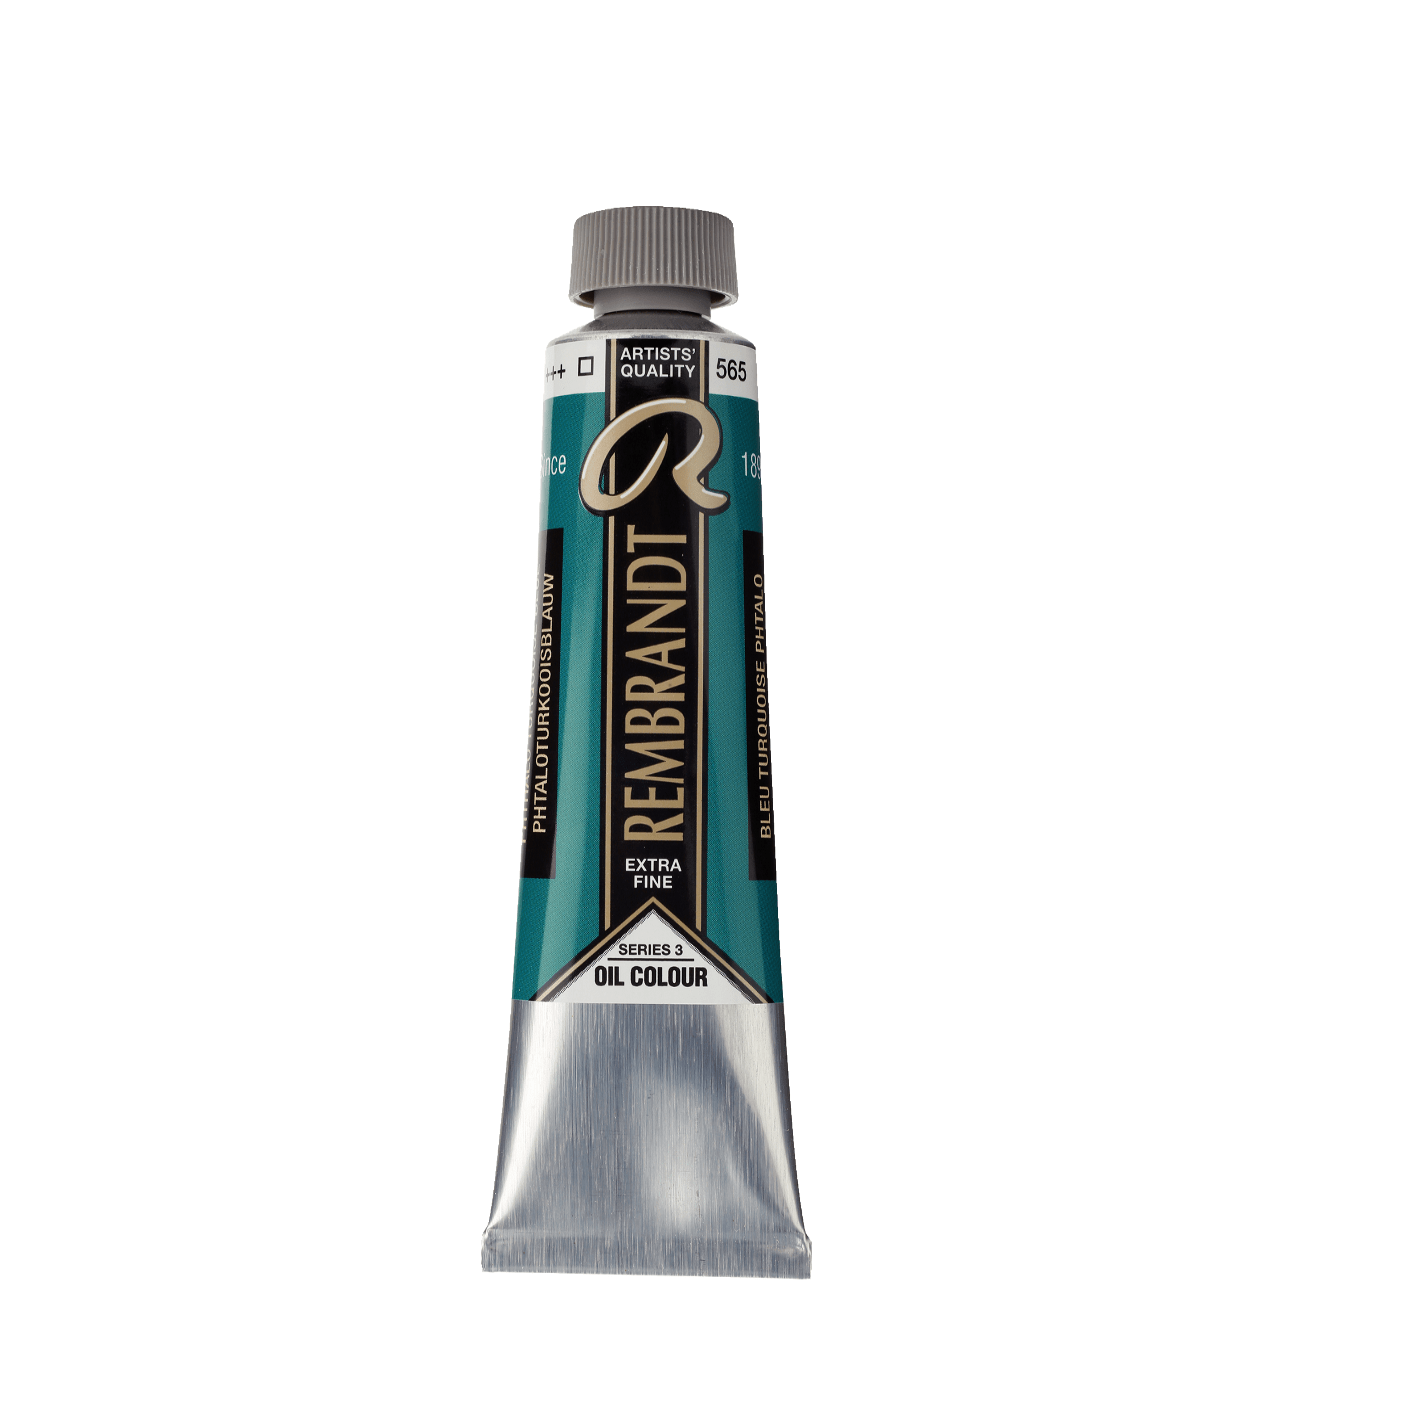 Rembrandt Oliemaling 40ml Phthalo Turquoise Blue